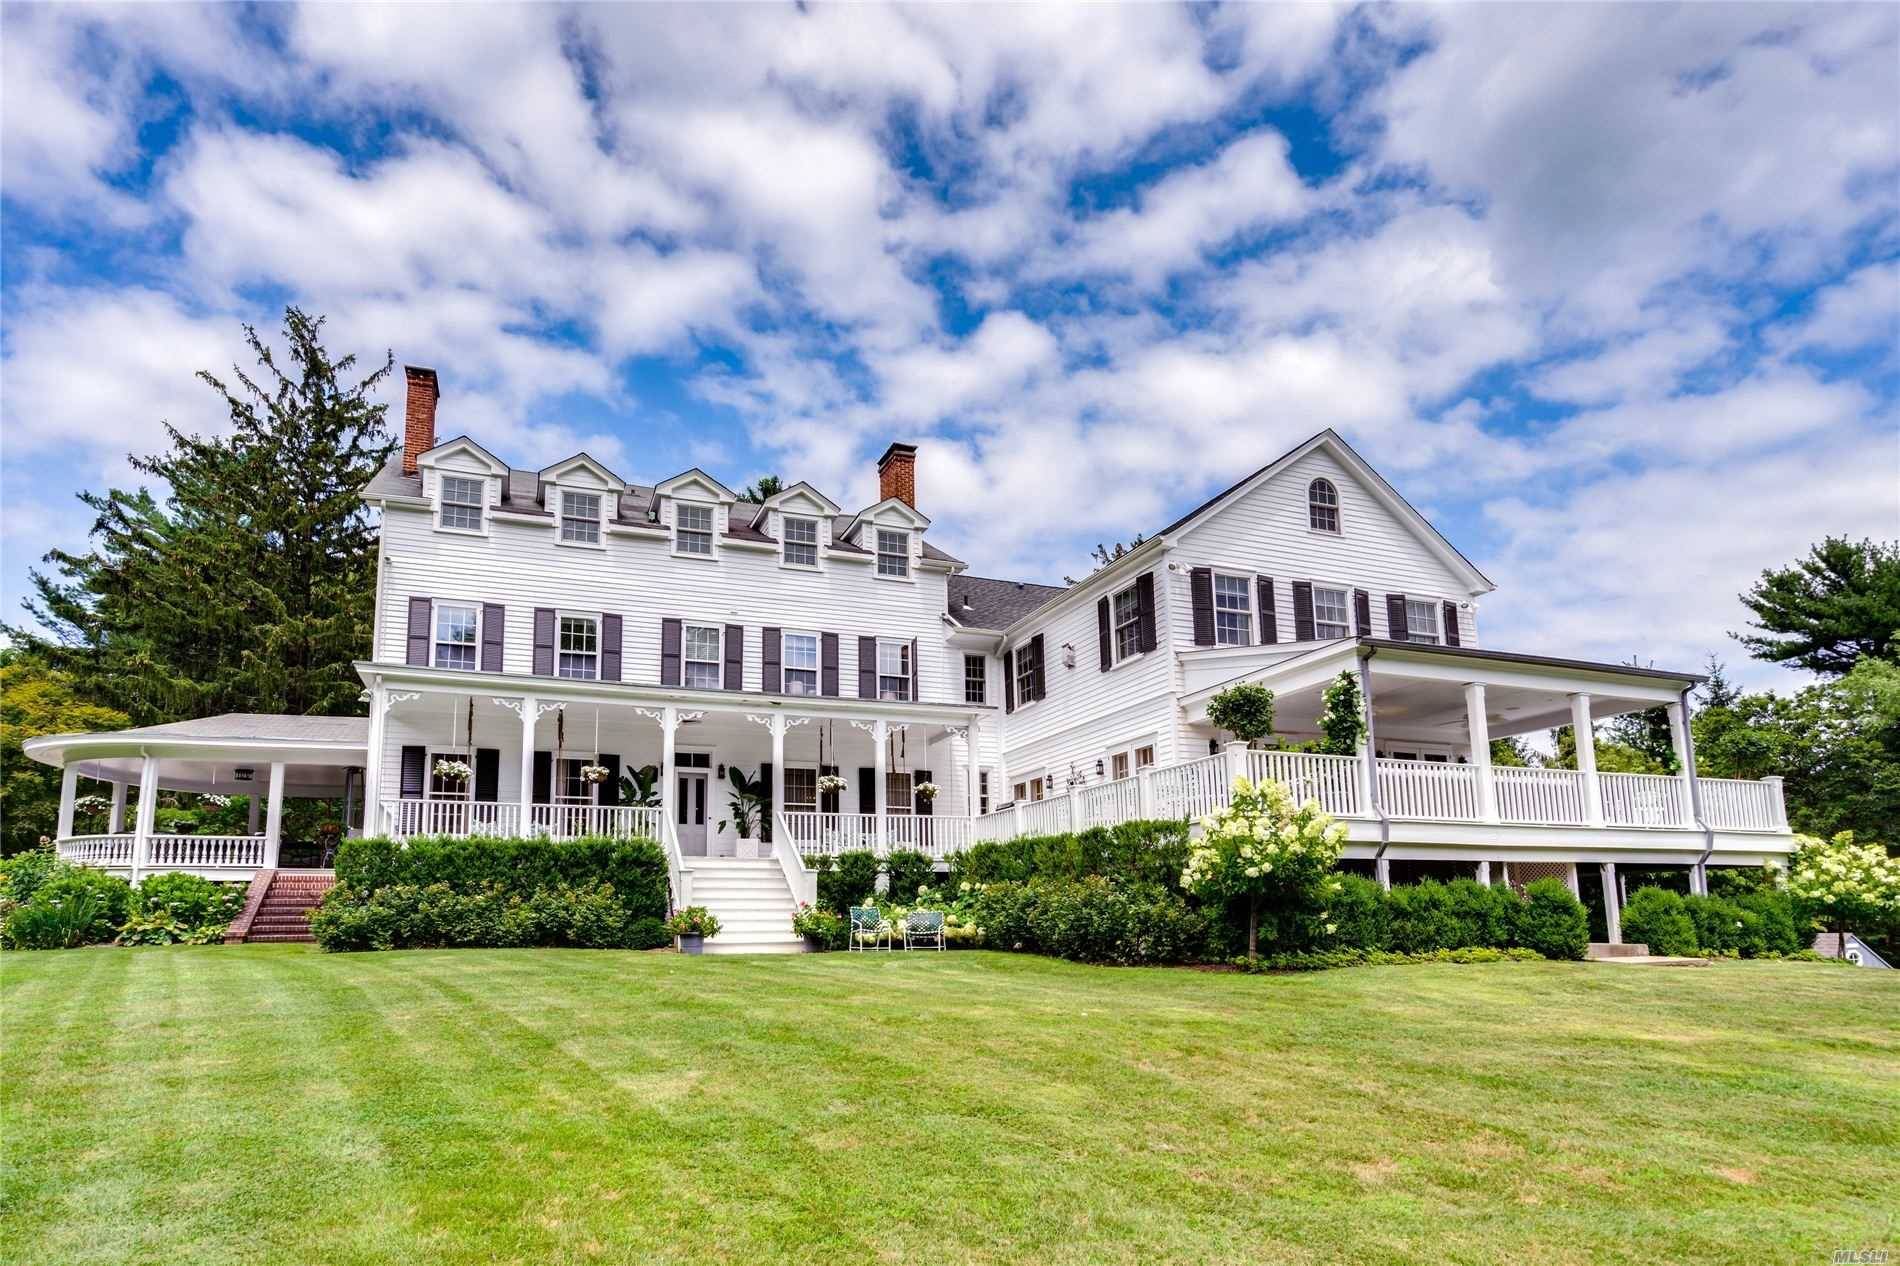 This fabulous renovated 1863 stunning colonial features 8 bedrooms, 6FB, 2HB with front to back center hall and 10 foot ceilings with original crown moldings.